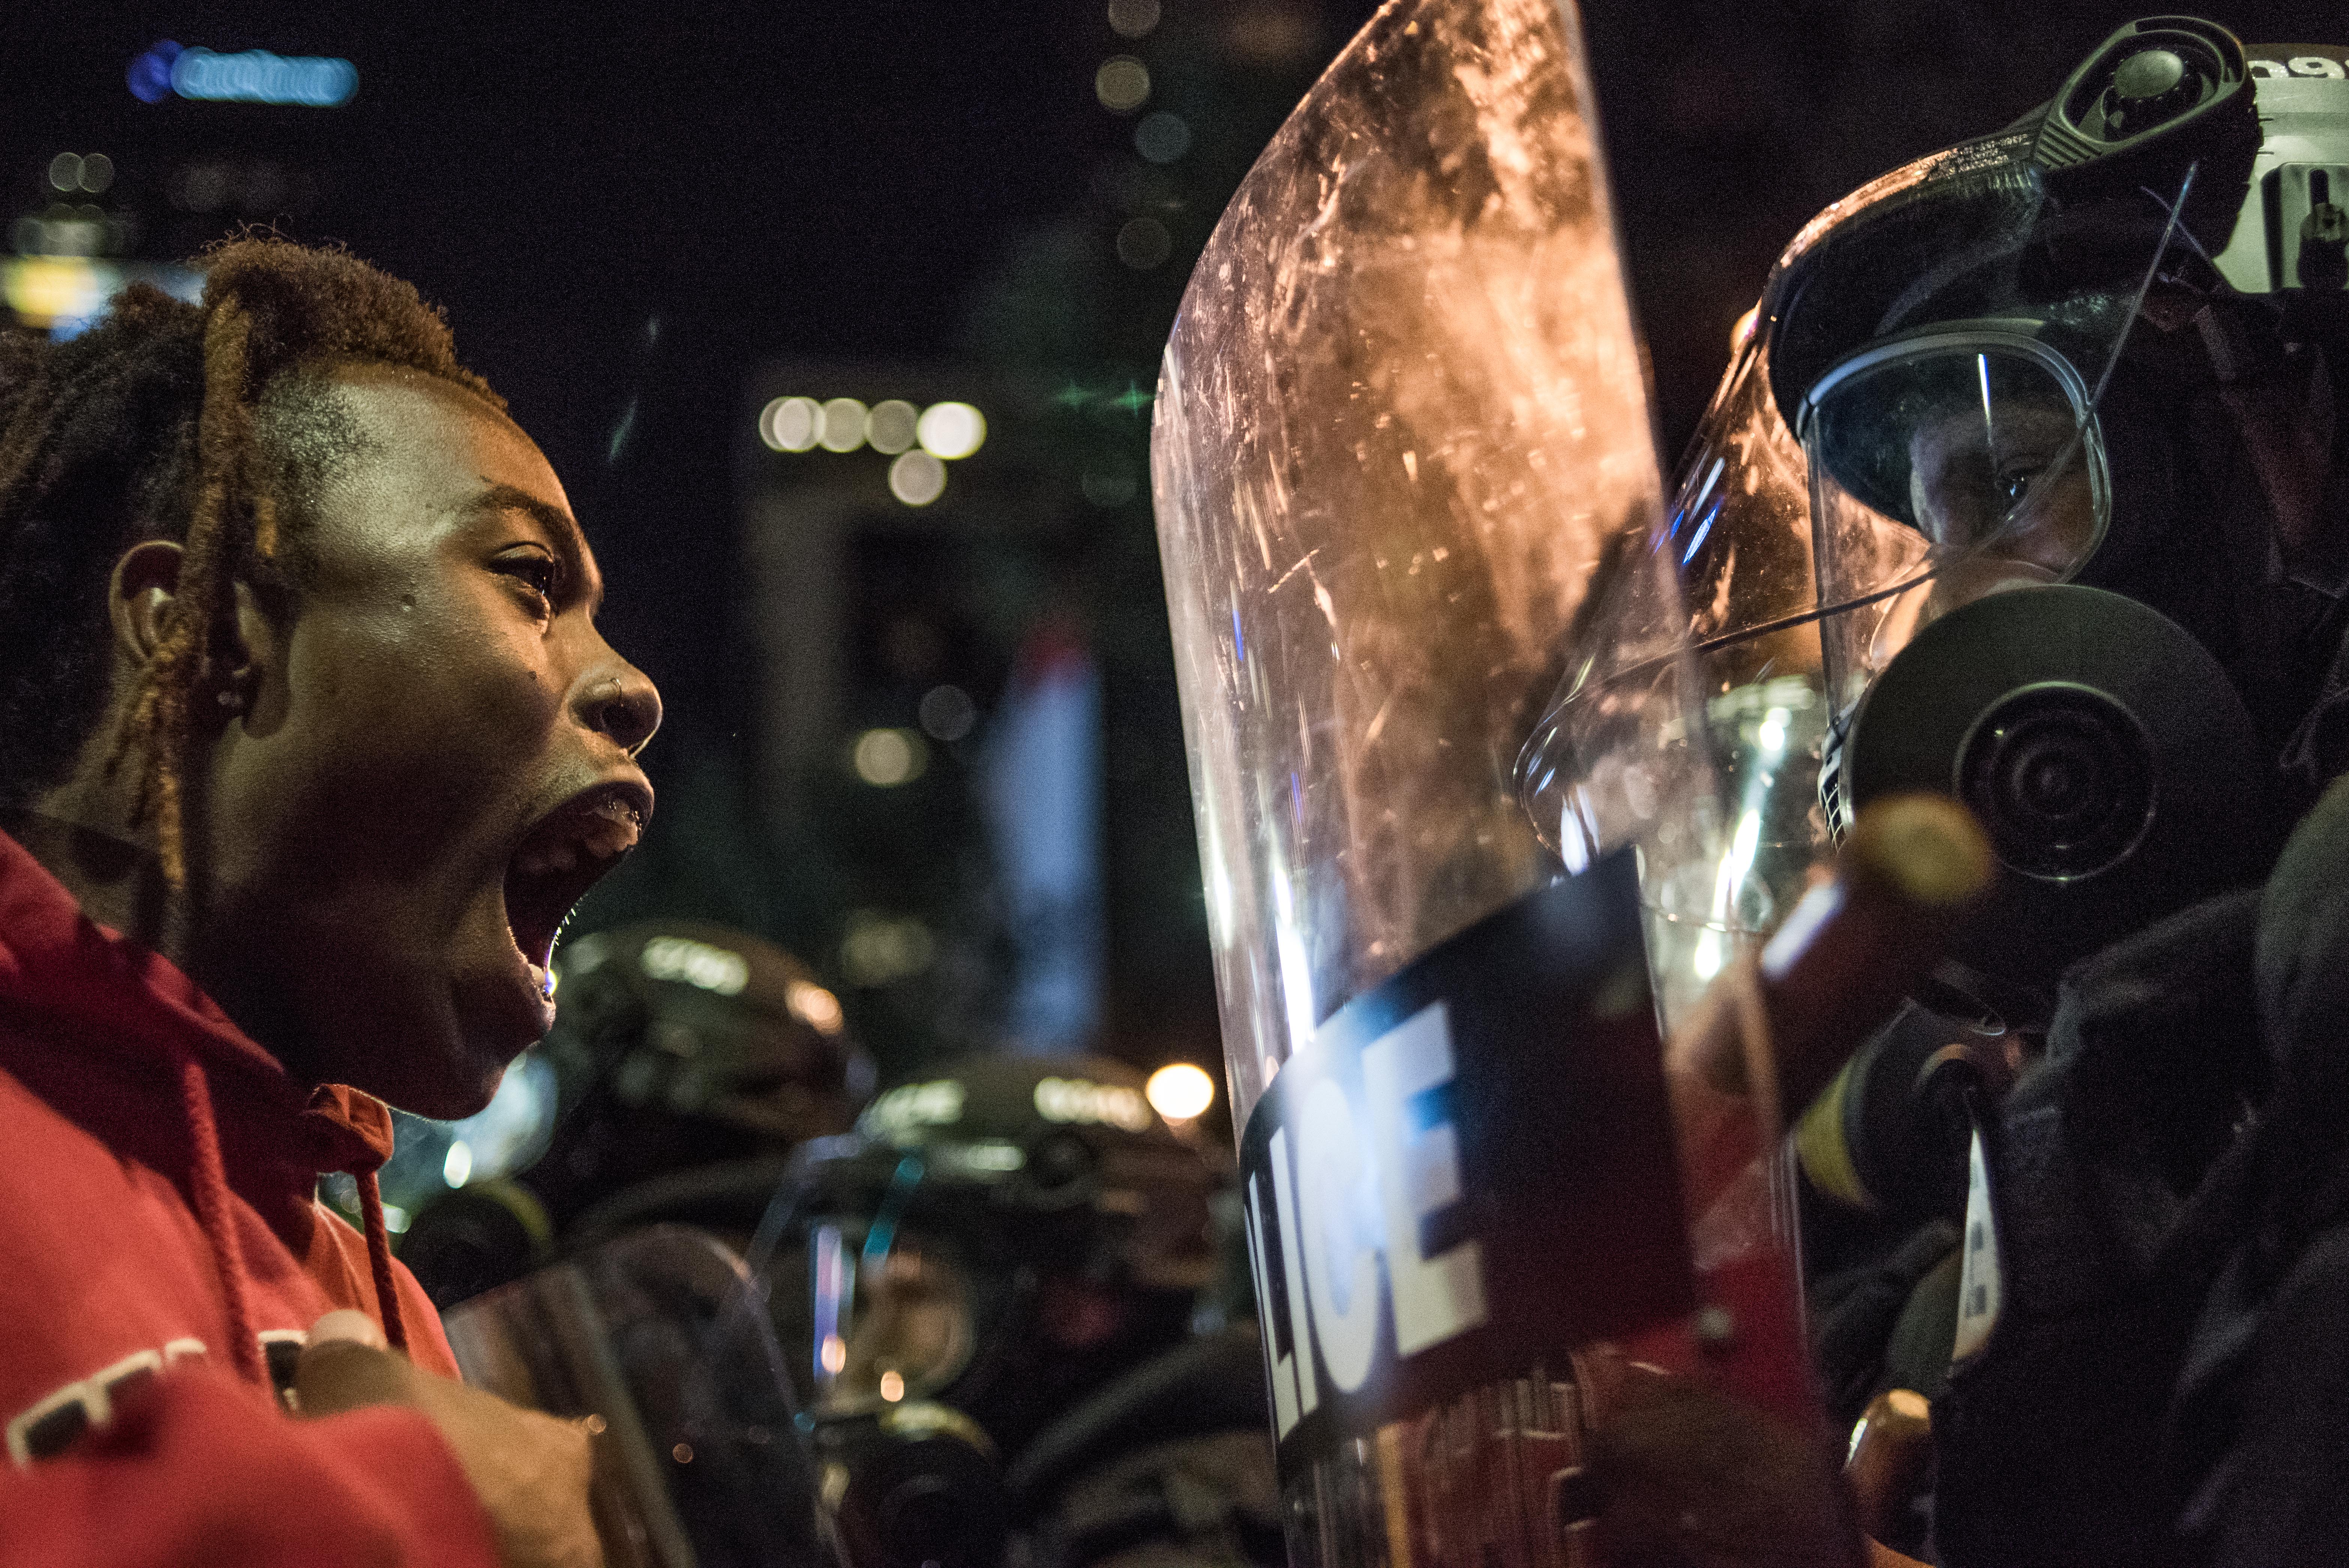 36 Of The Most Powerful, Harrowing And Inspiring Protest Photos From 2016
